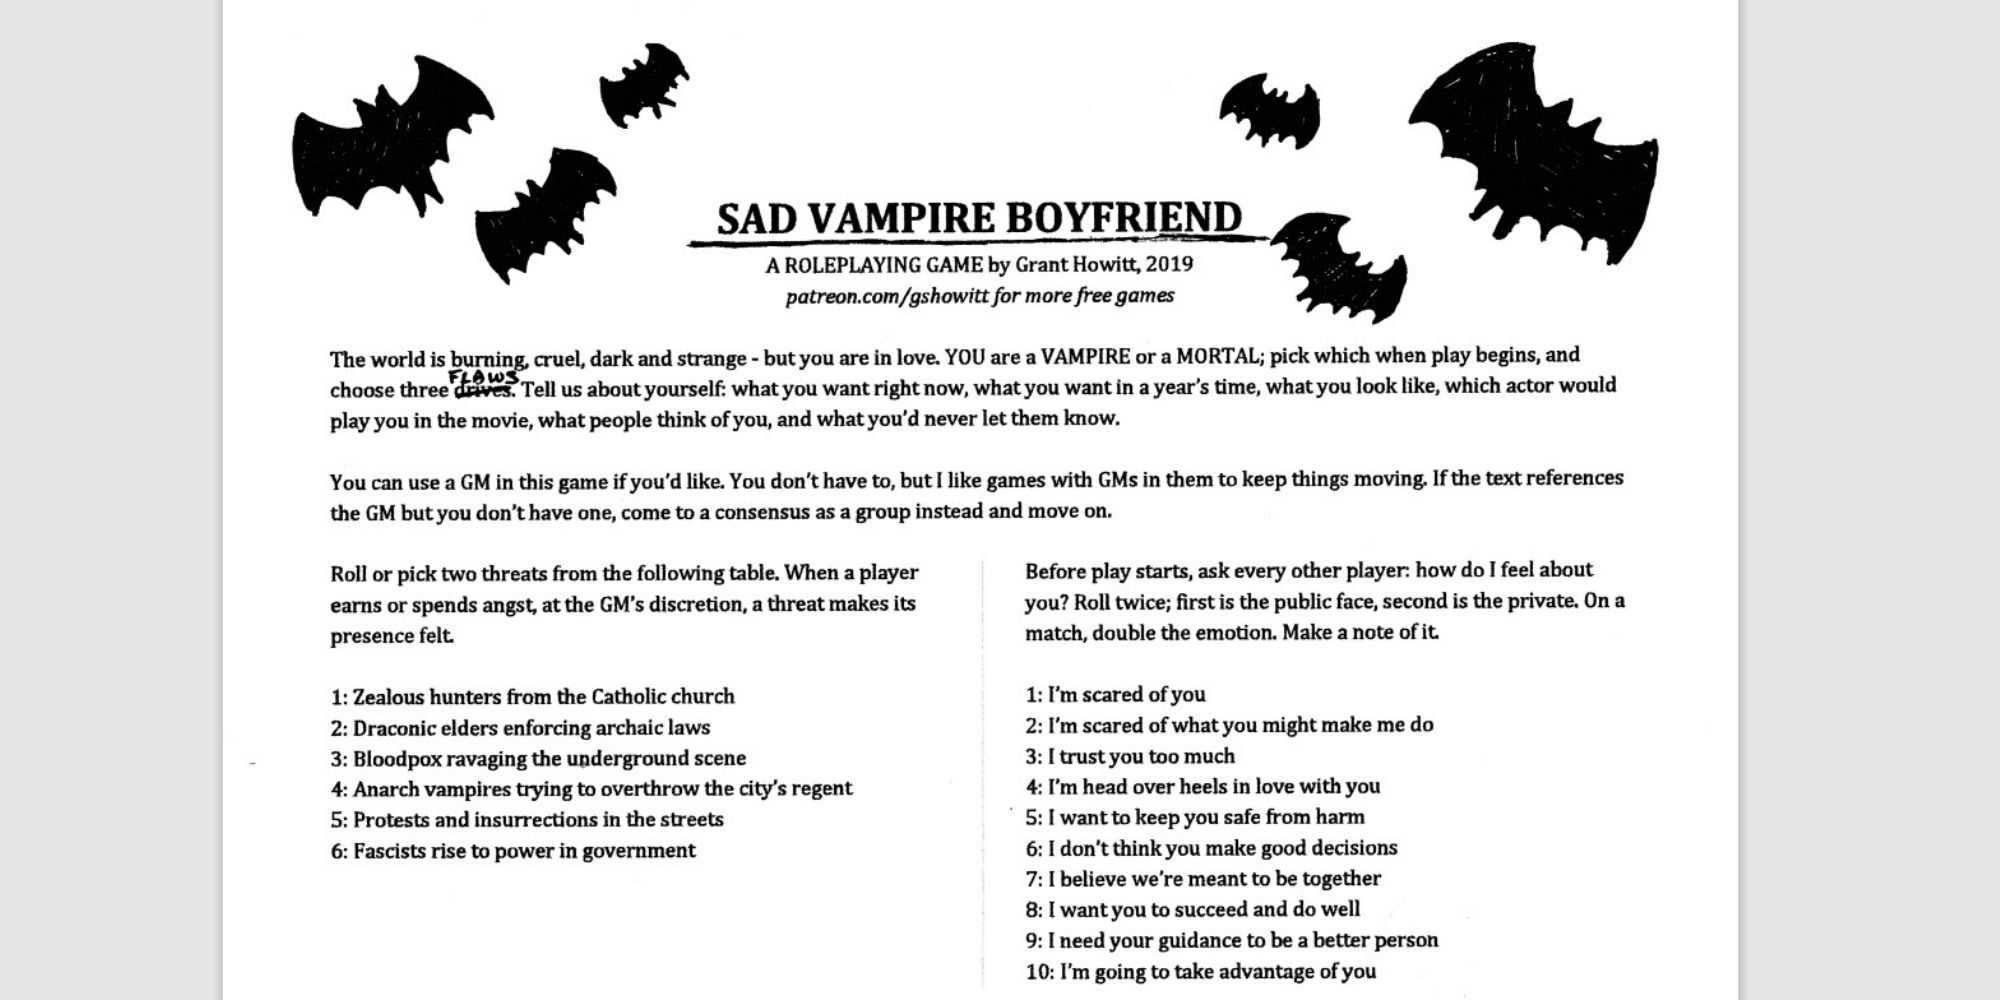 Sad Vampire Boyfriend one-page RPG rules with doodles of bats